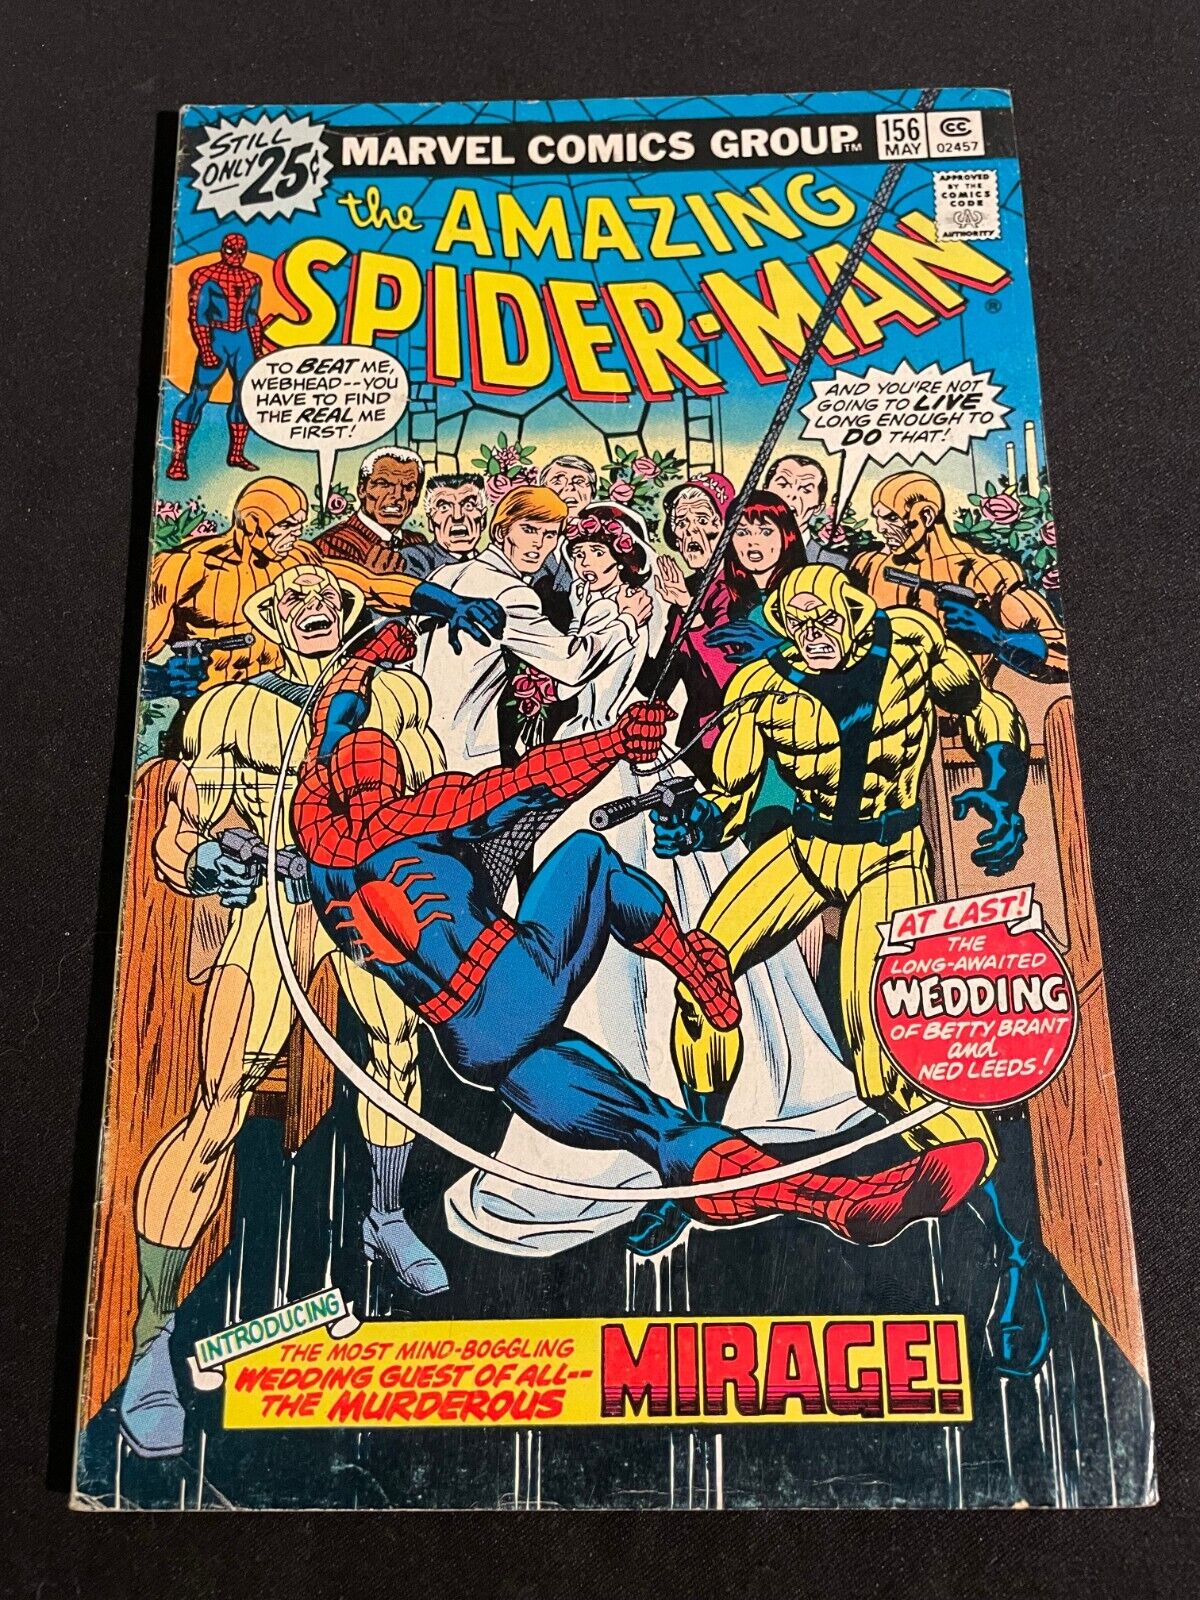 THE AMAZING SPIDER-MAN #156 VG+ Condition